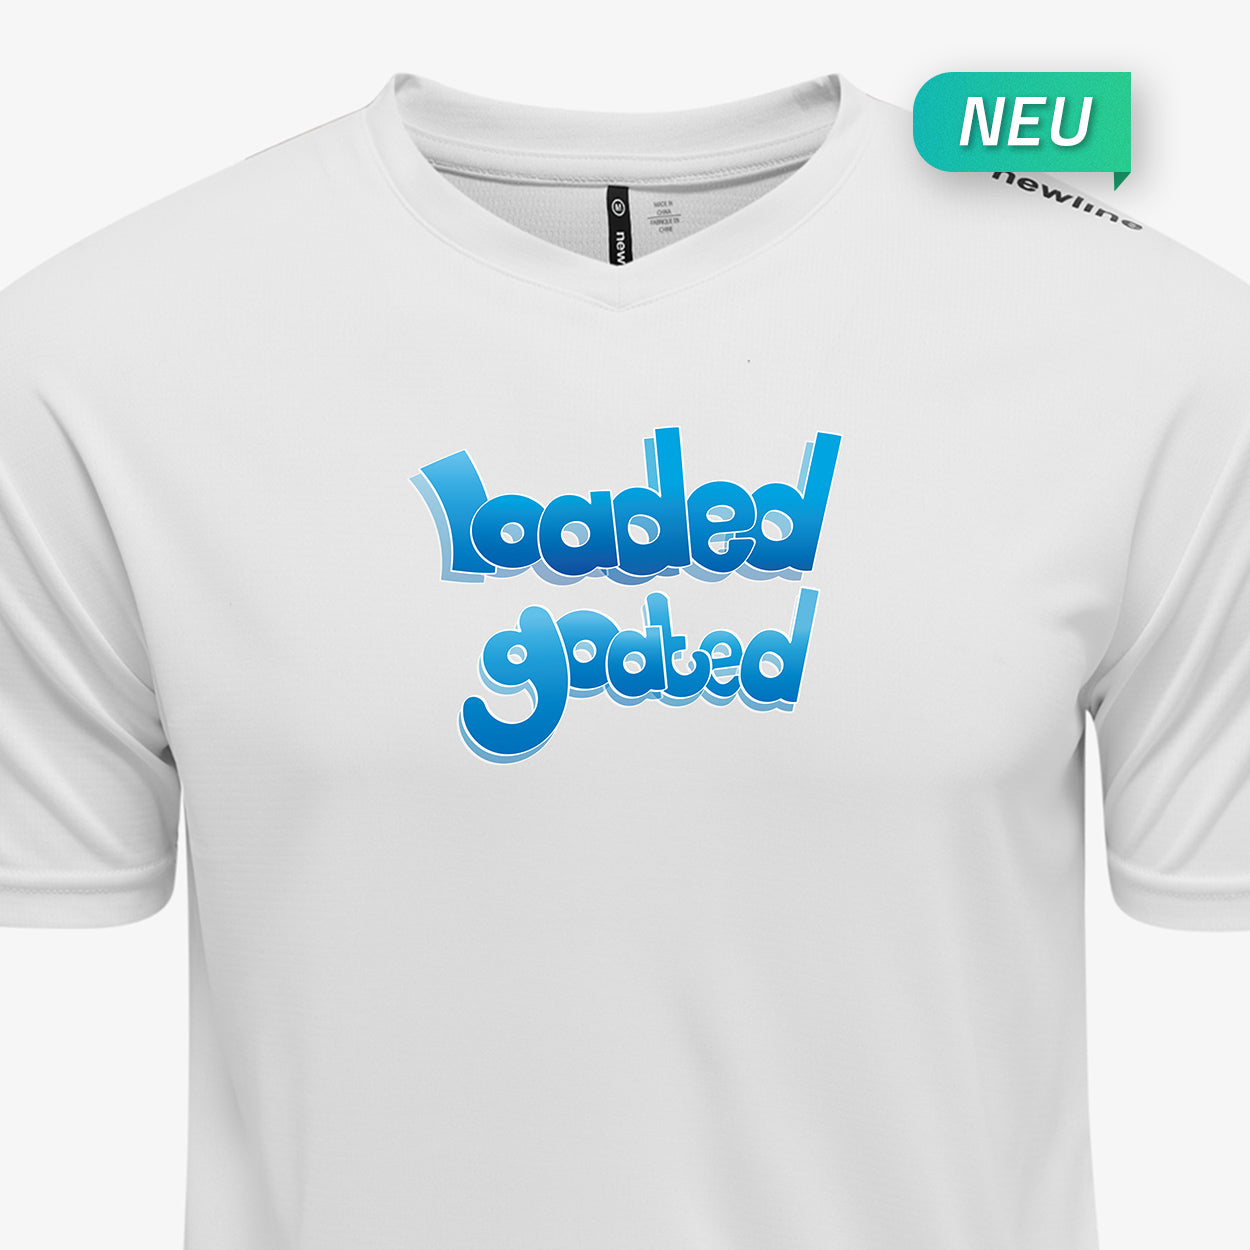 Loaded goated - T-Shirt